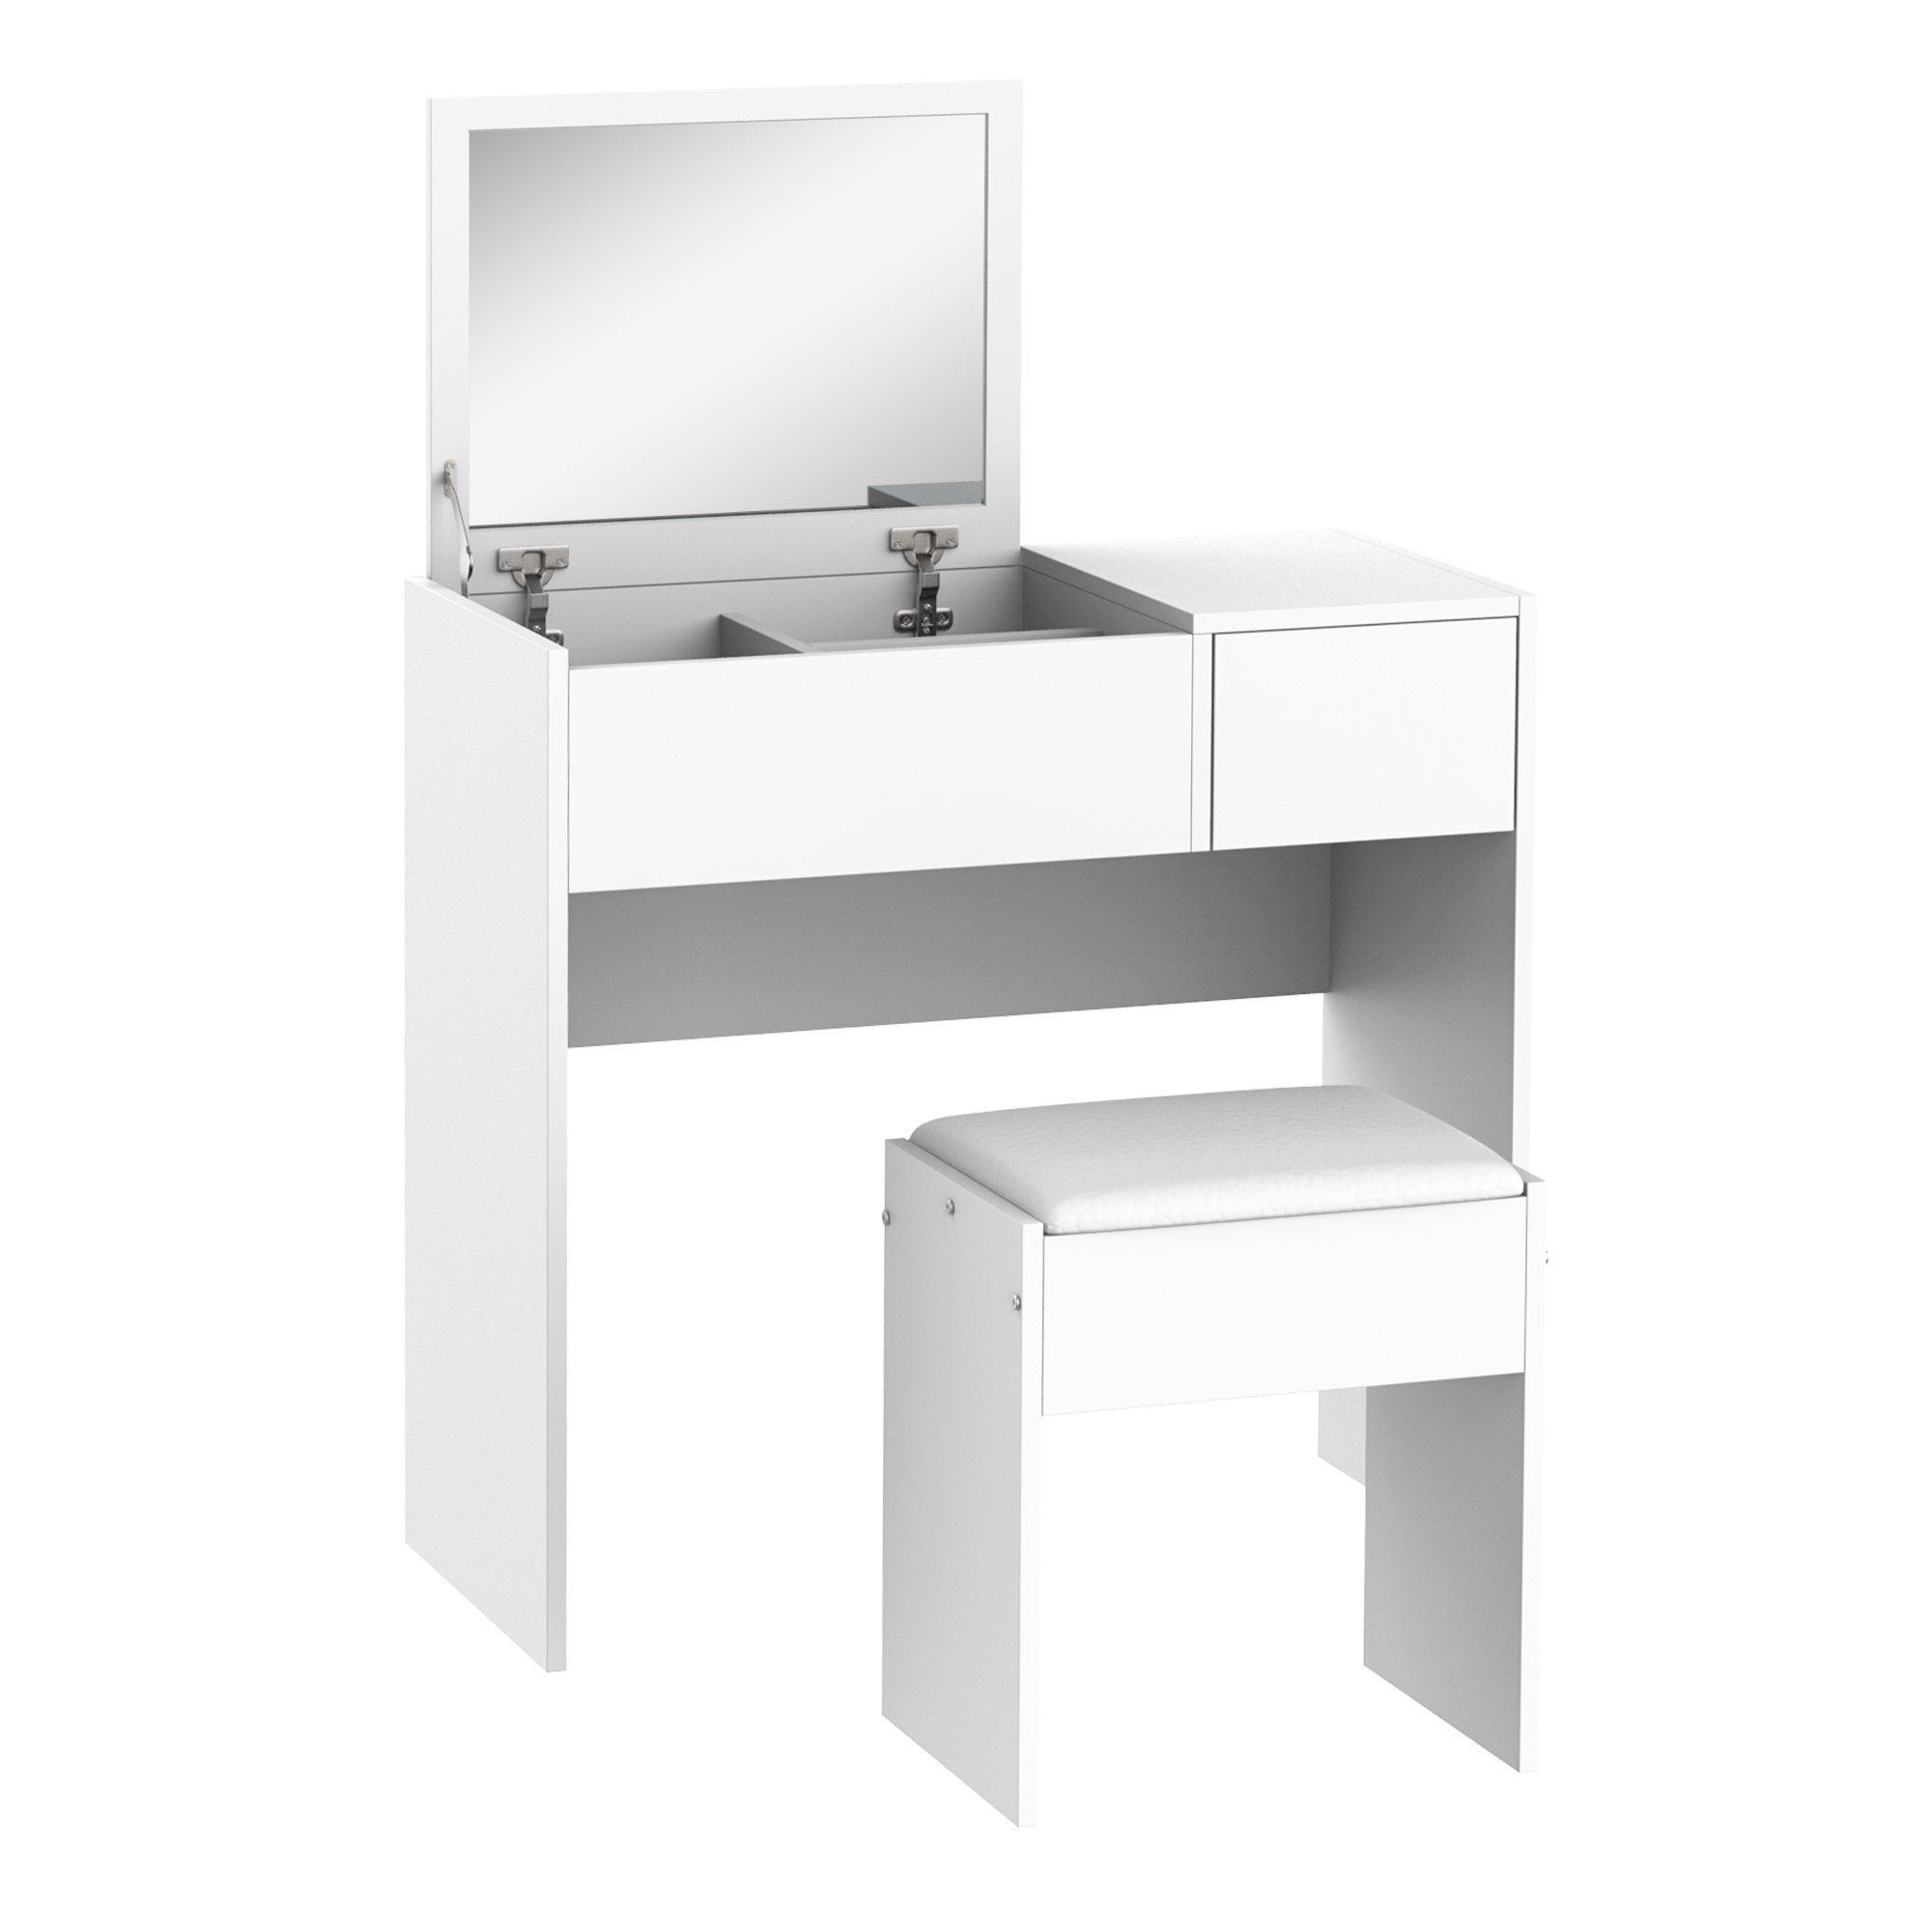 Dressing Table Set with Flip up Mirror Padded Stool Dresser - image 1